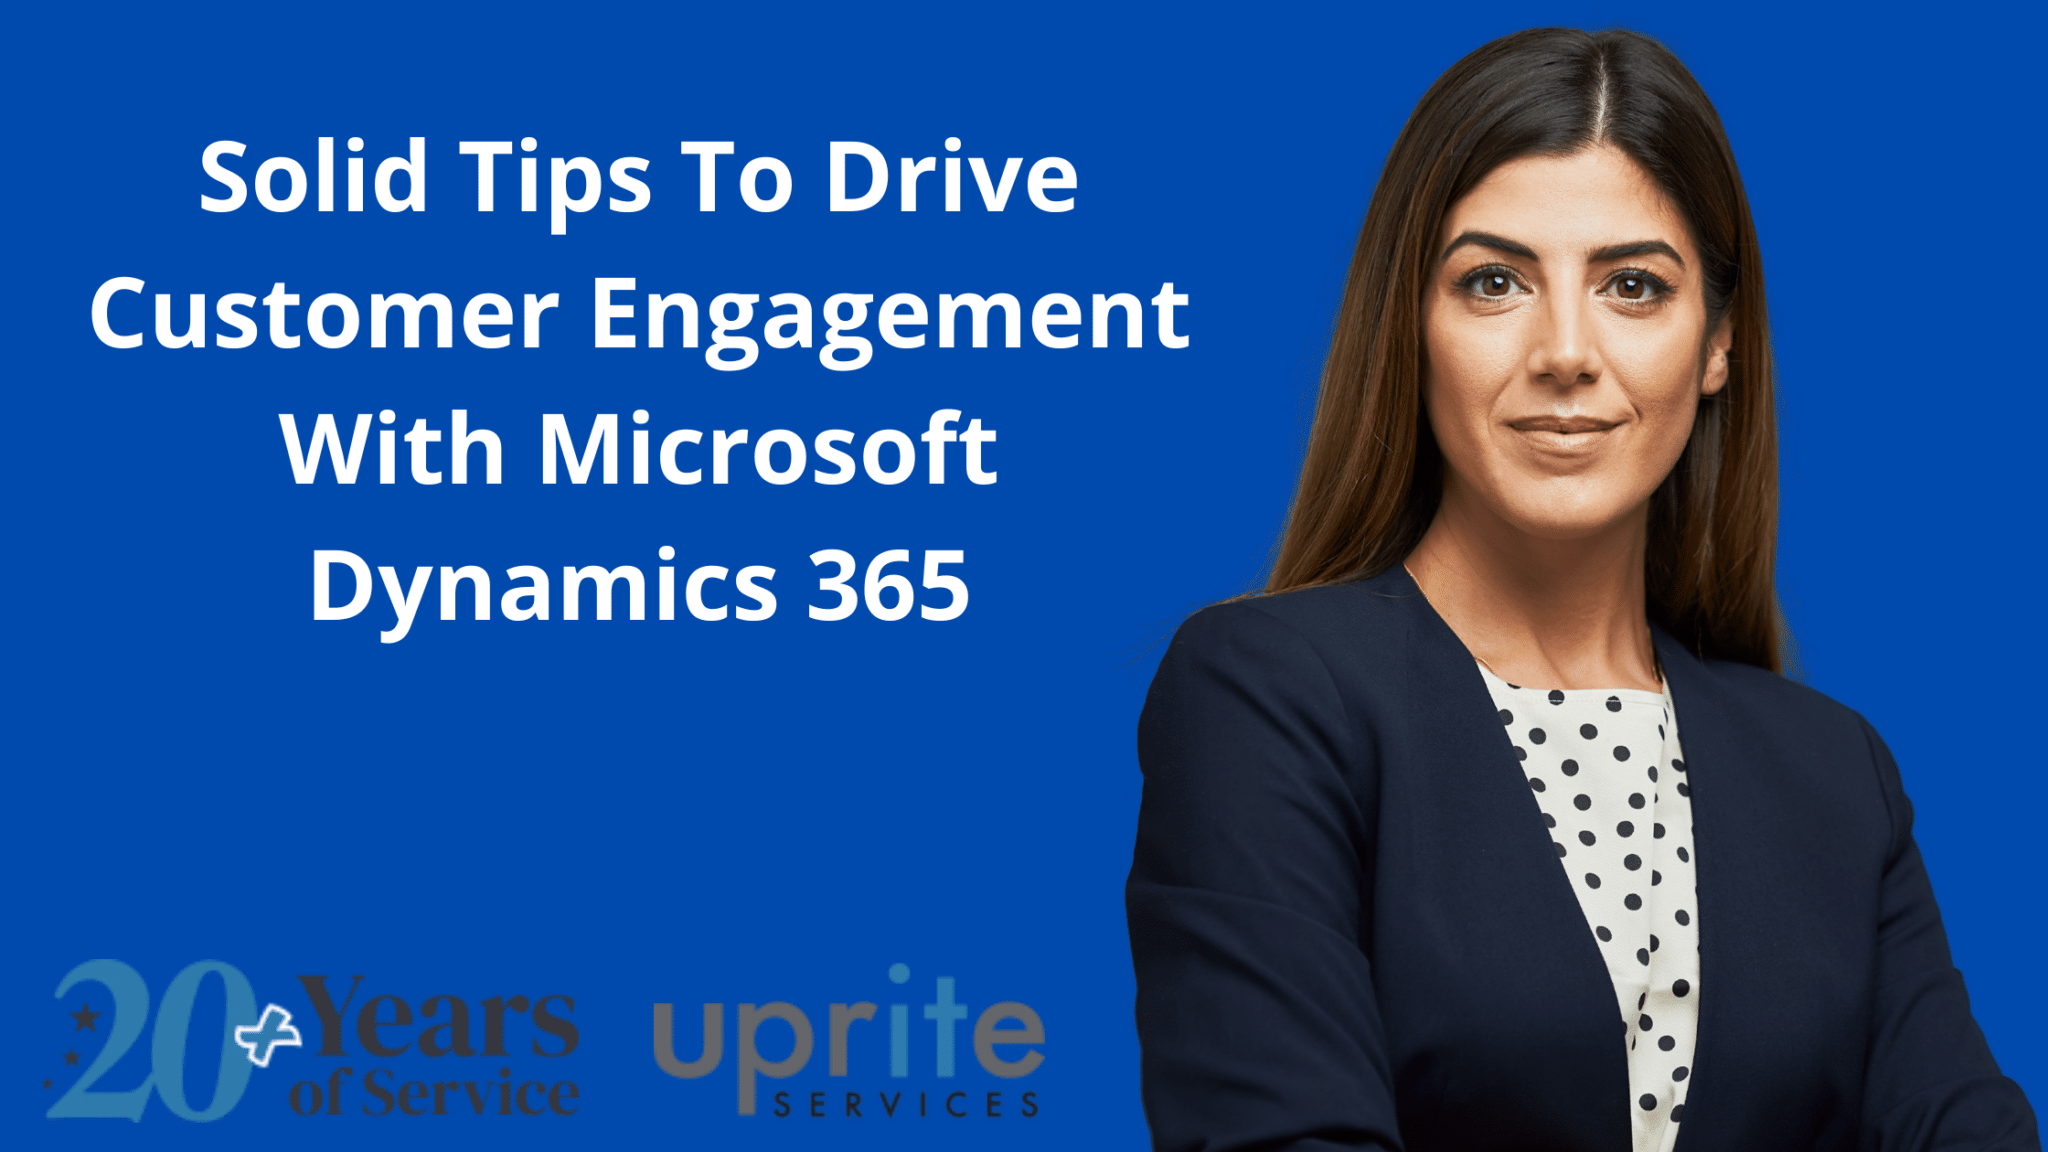 Solid Tips To Drive Customer Engagement With Microsoft Dynamics 365